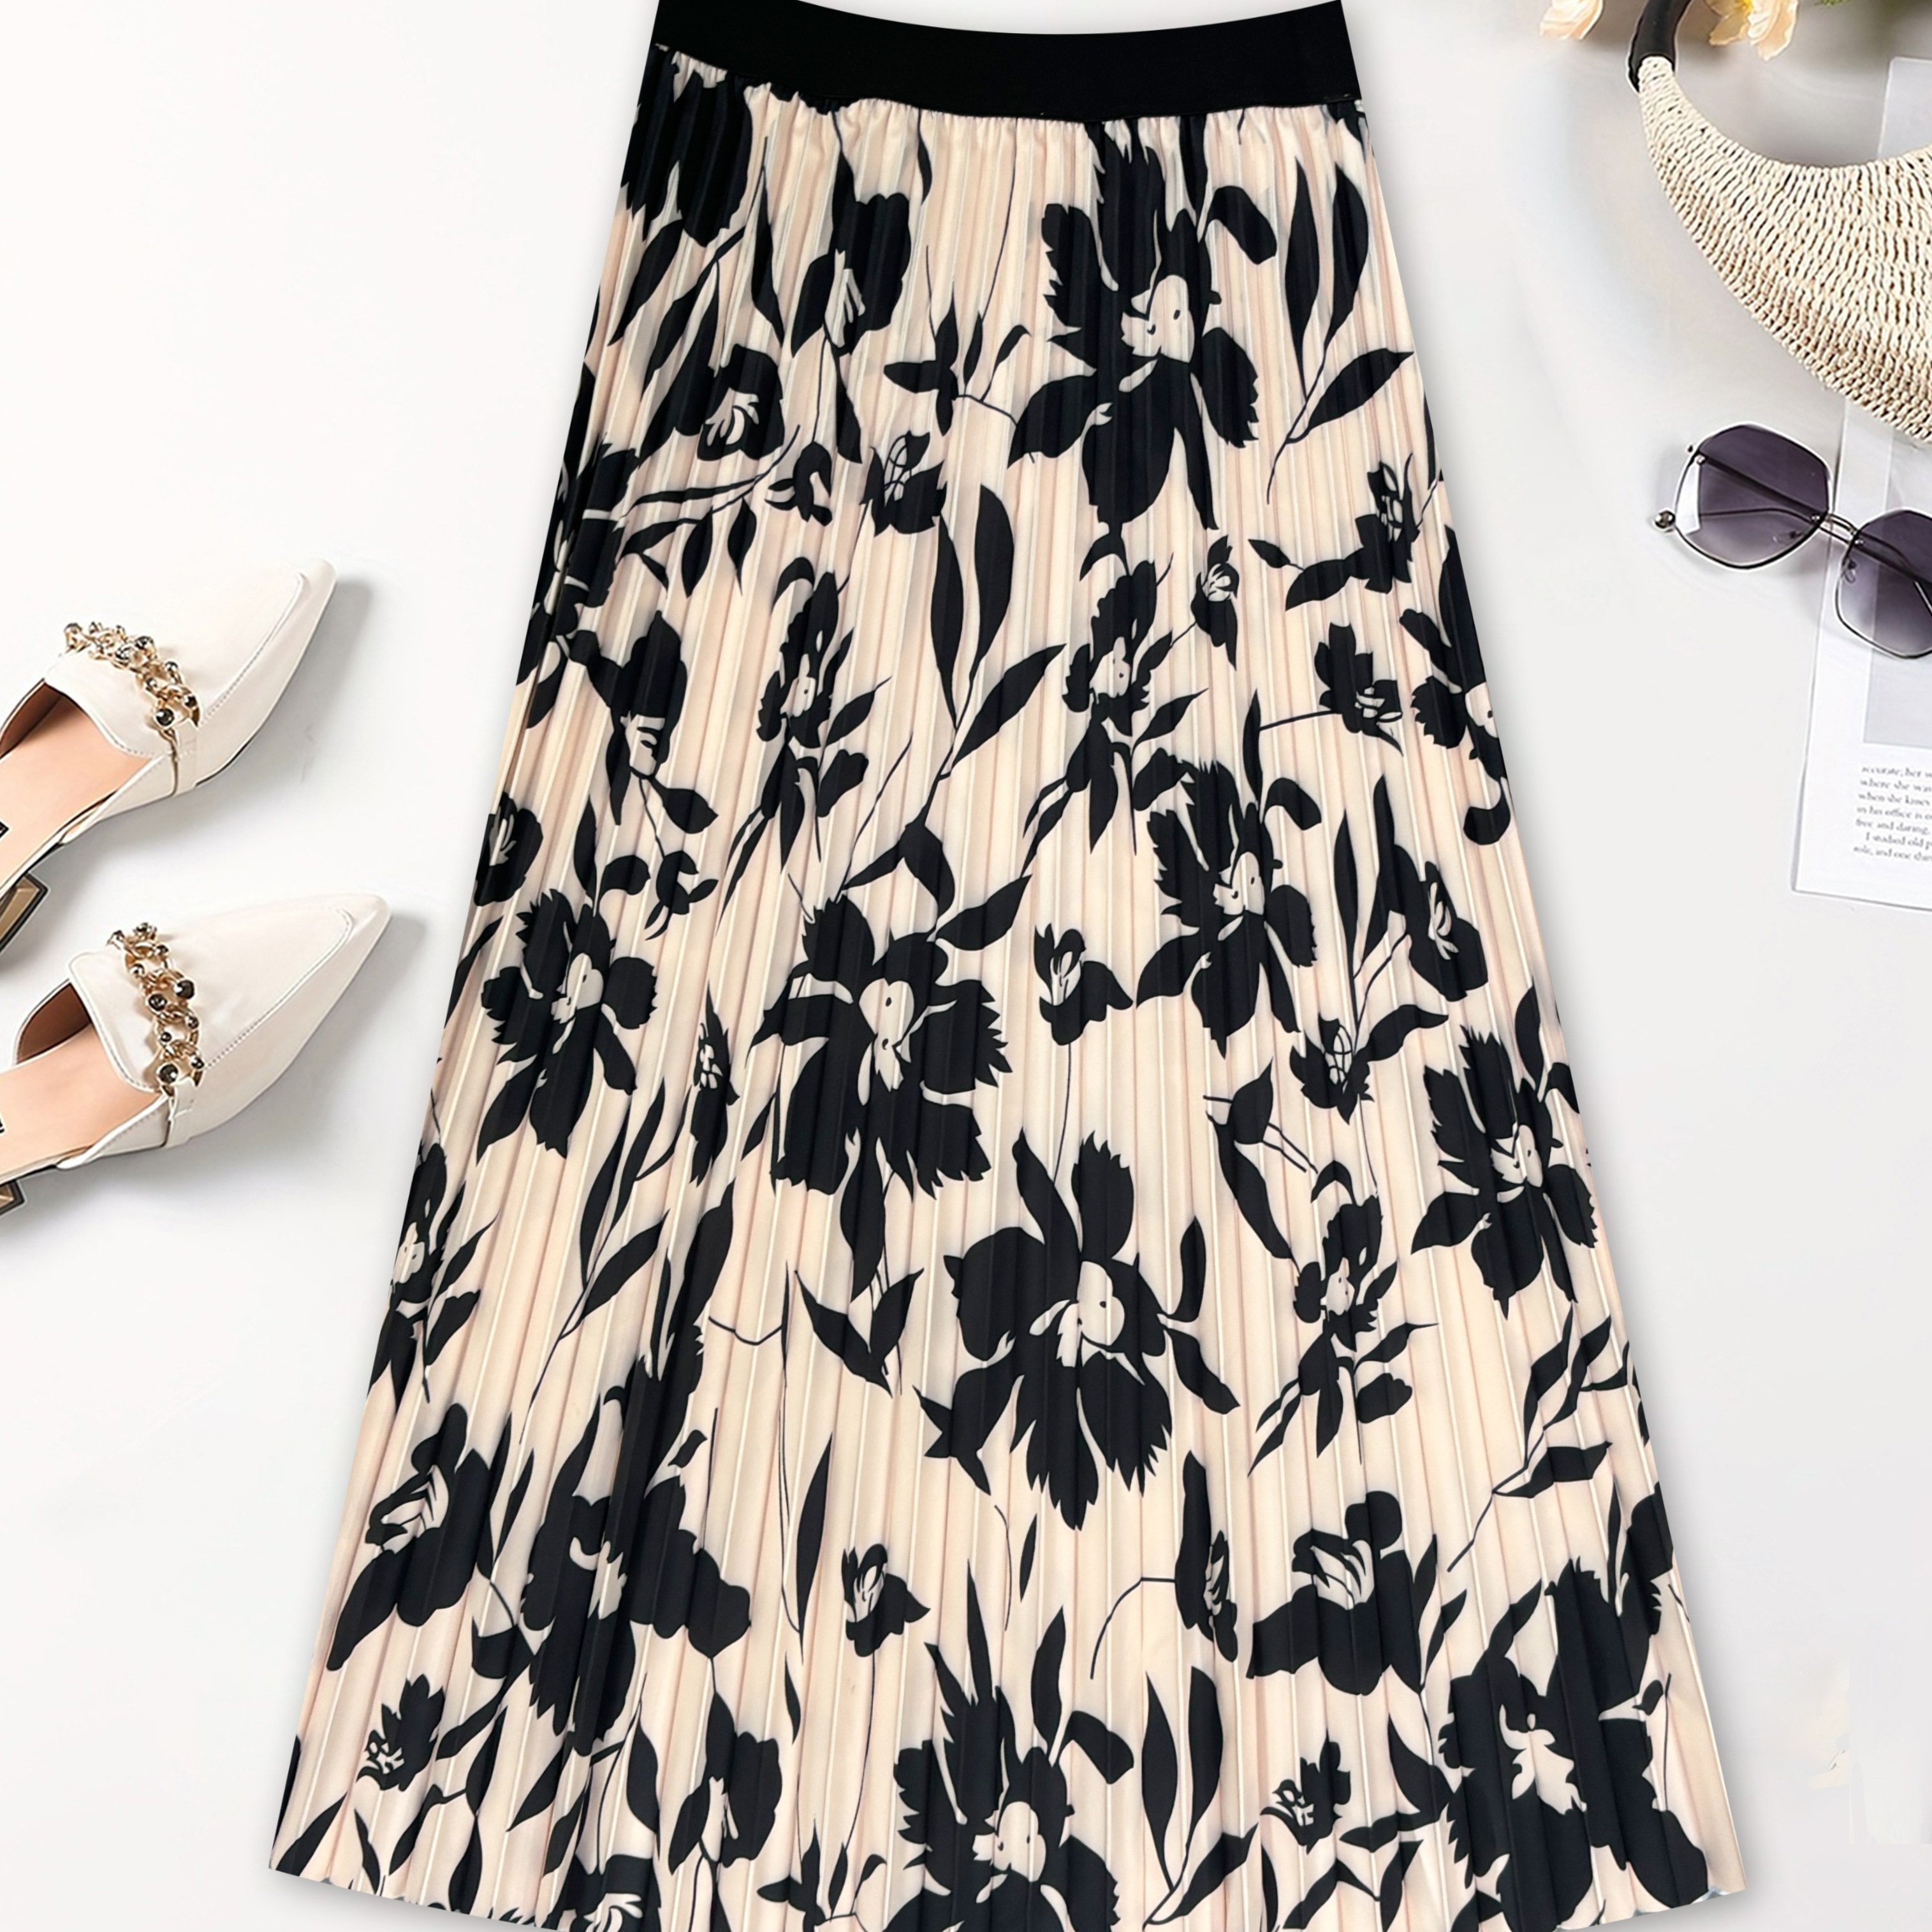 

Floral Print High Waist Pleated Skirt, Casual A-line Midi Skirt For Spring & Summer, Women's Clothing